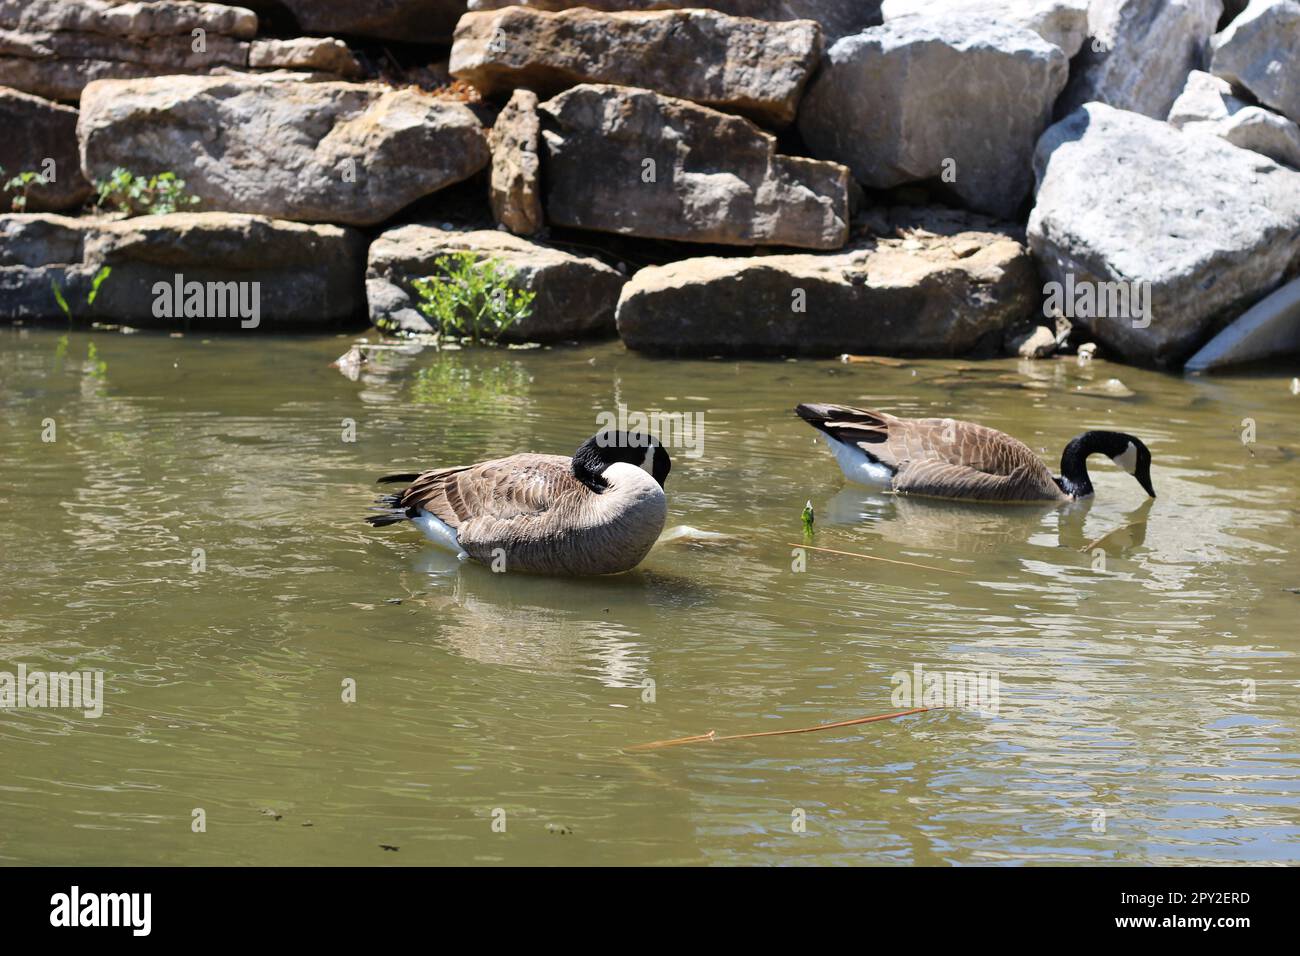 Pair of Adult Canadian Geese wading + swimming on the water in the Midwest. They often stick together and mate for life. Beautiful pair of lovebirds. Stock Photo